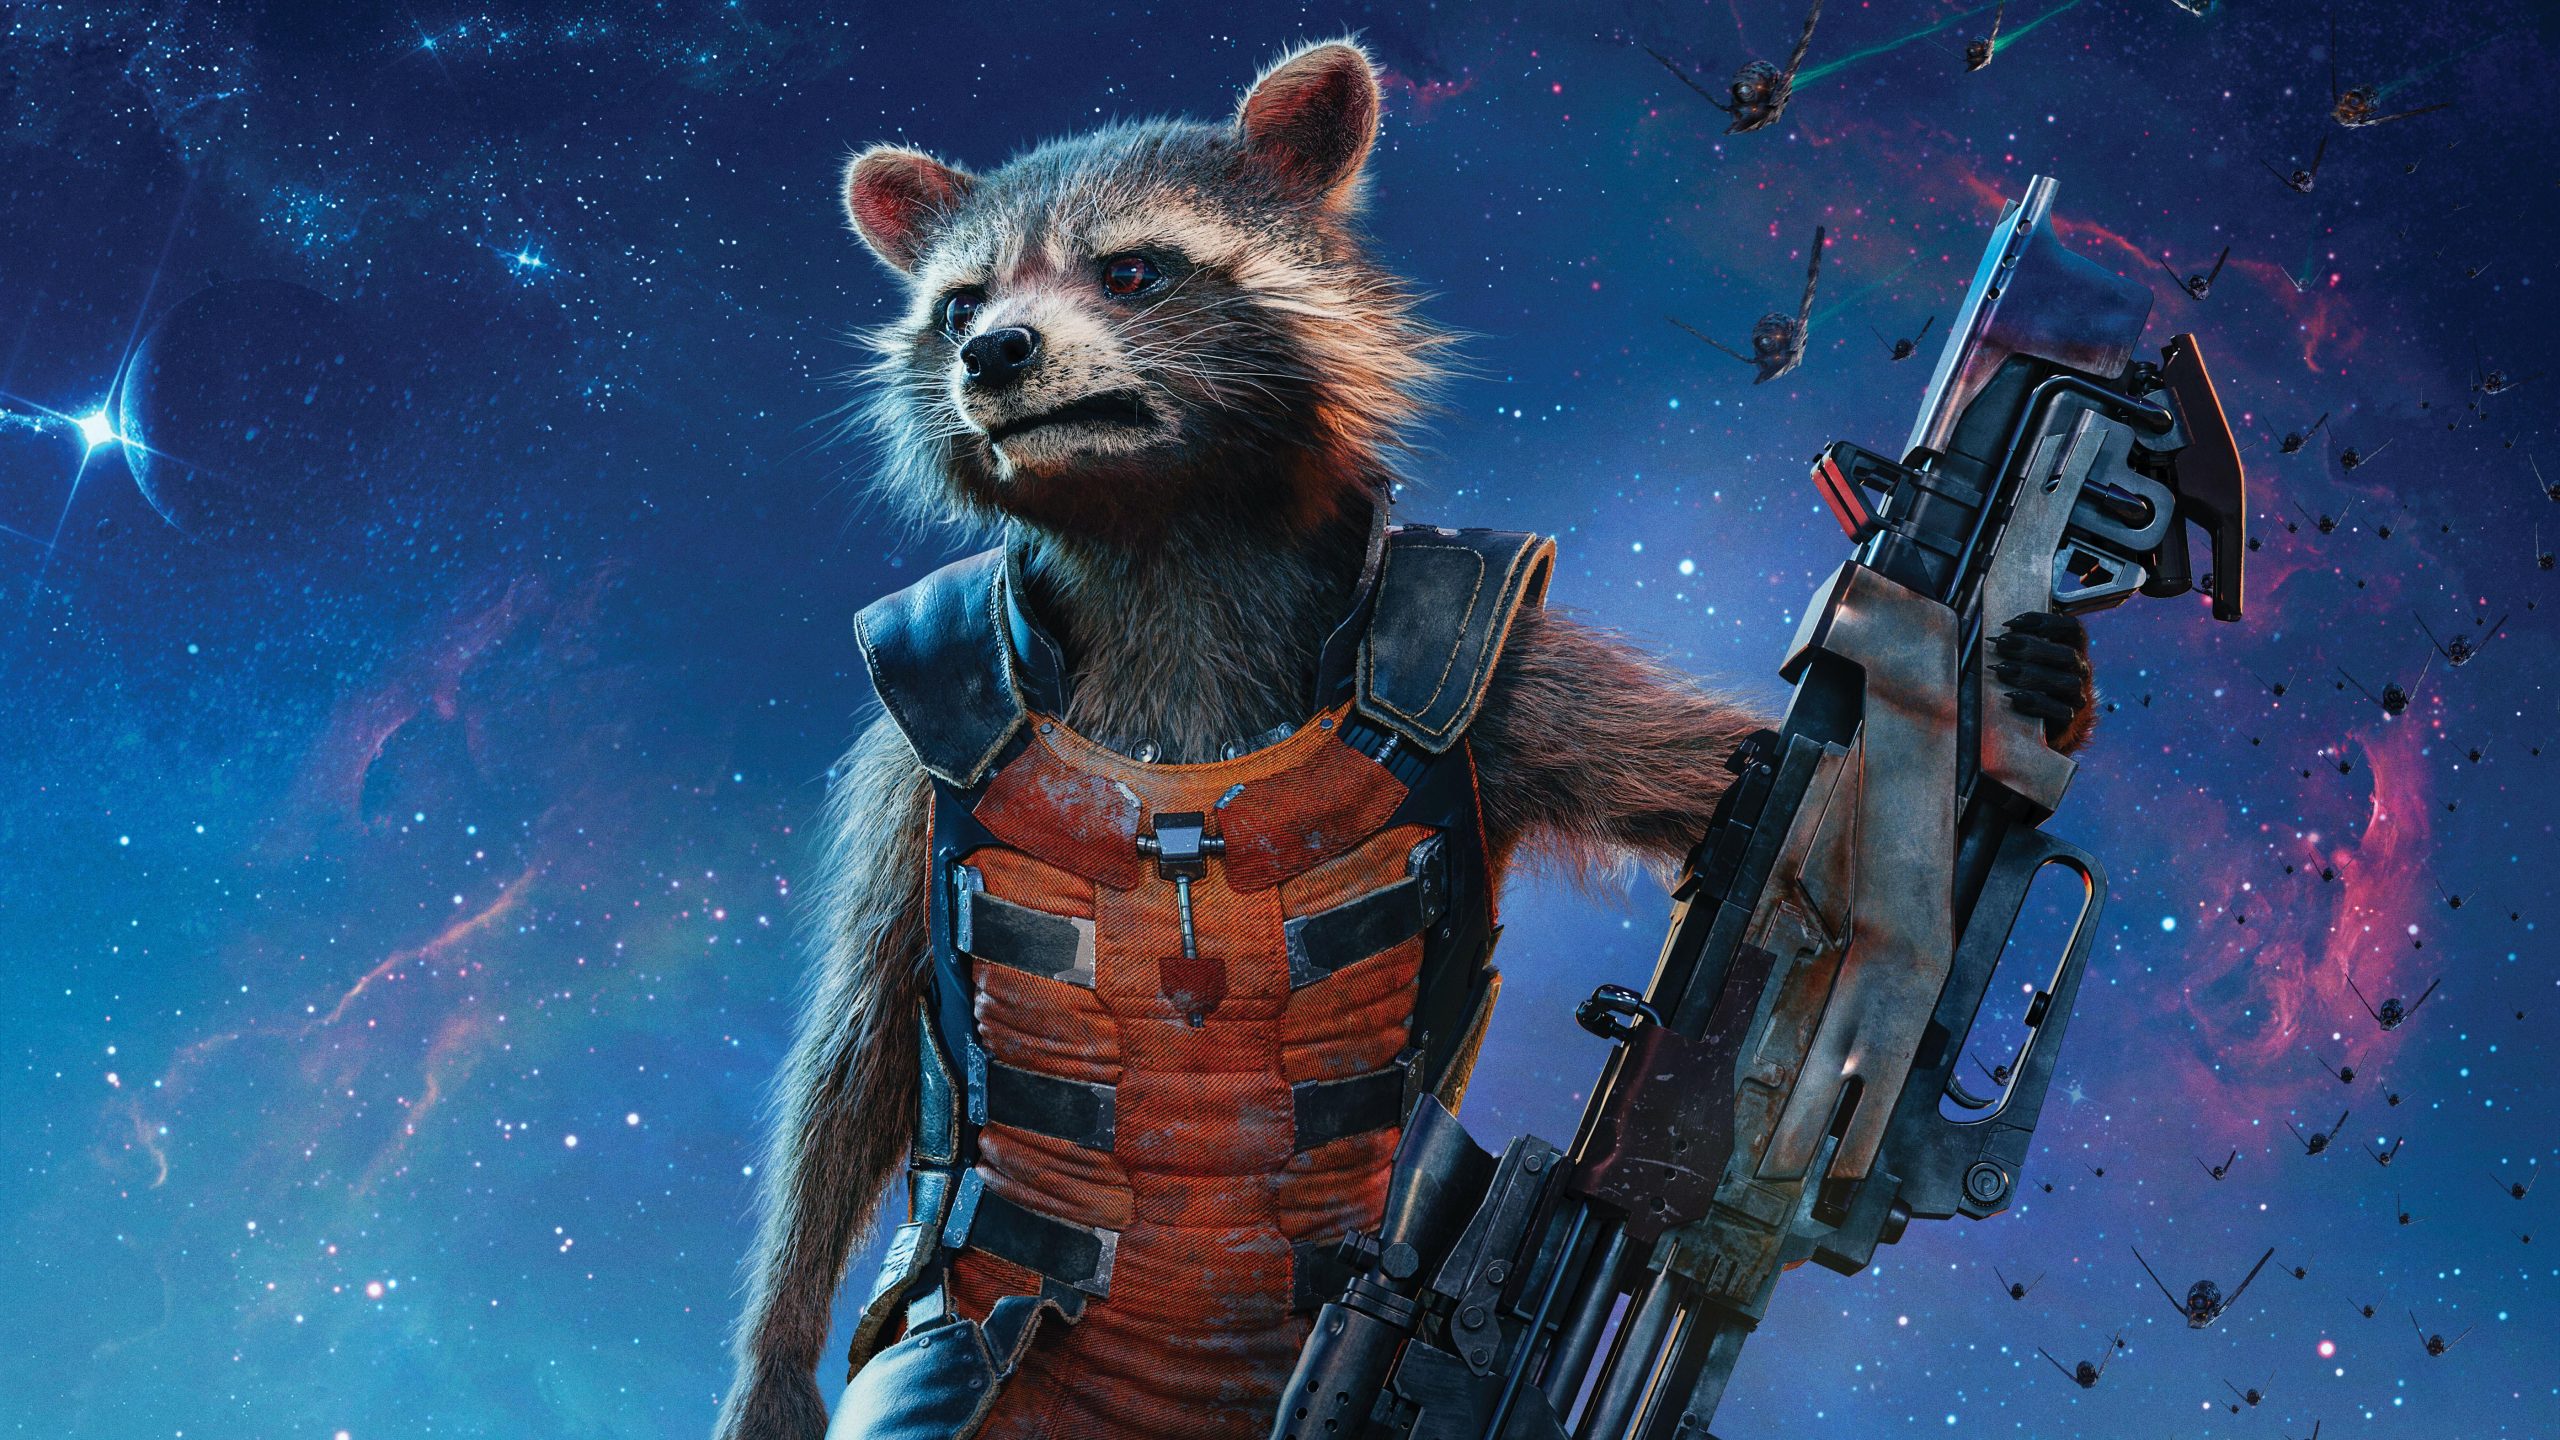 4k Guardians Of The Galaxy New Wallpaper, 4k Guardians Of The Galaxy, Movies